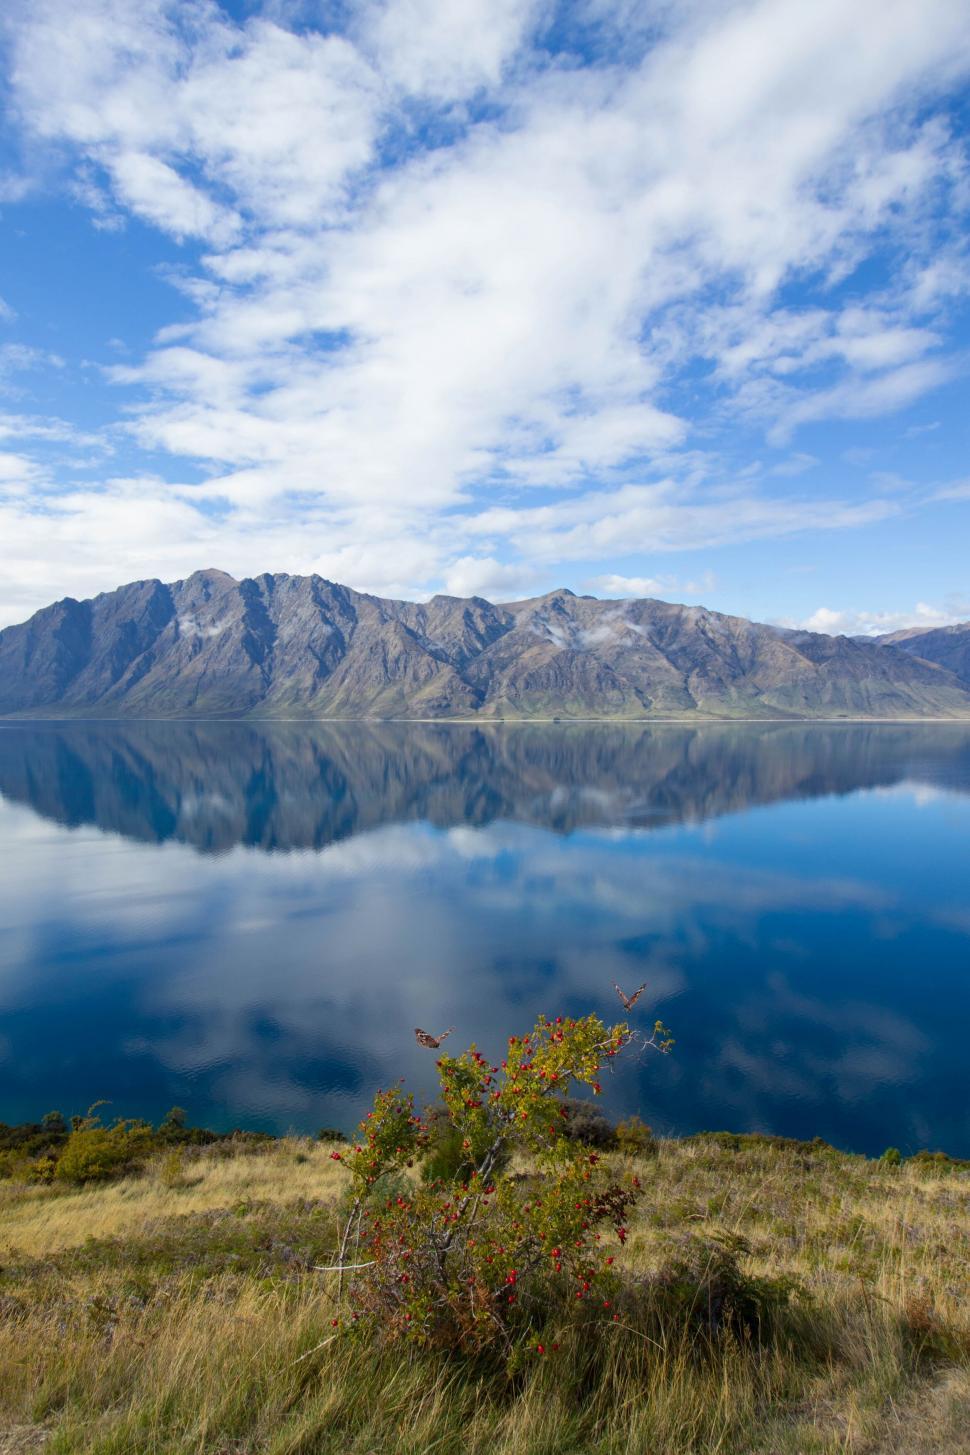 Free Image of Mountain reflection on a clear blue lake 